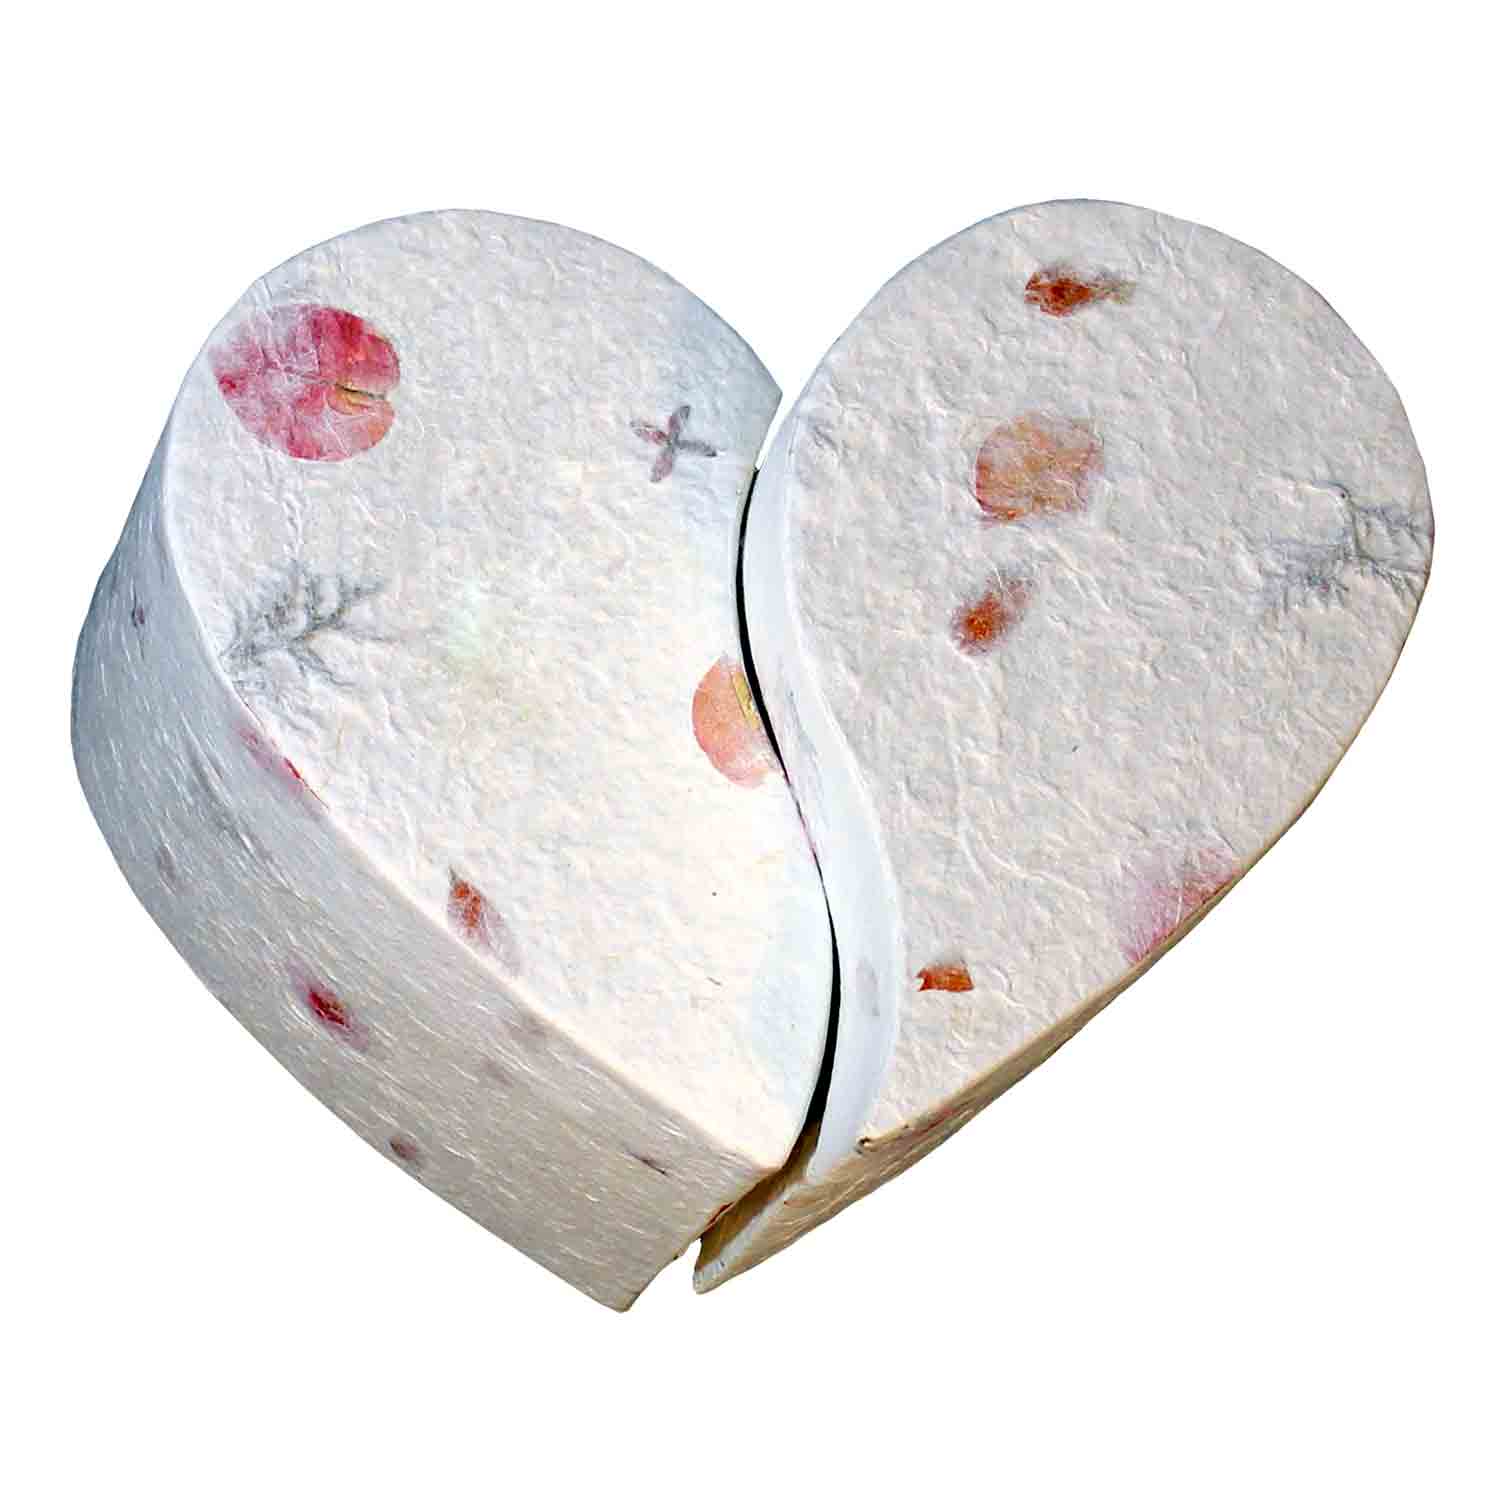 Heart Shaped Biodegradable Urn for Ashes Floral White Companion Two Piece